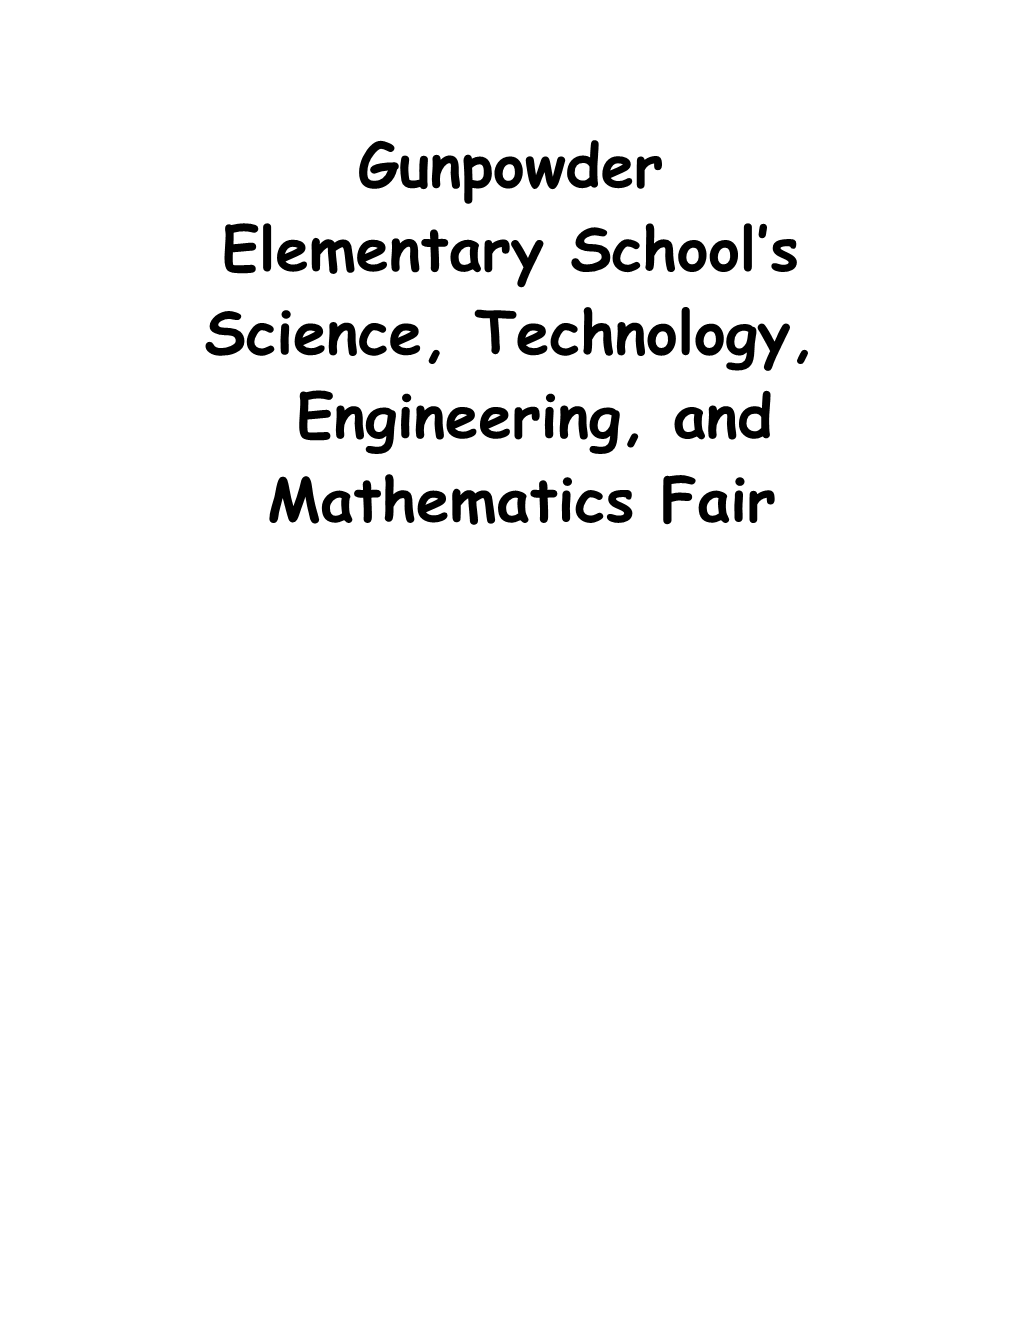 Science, Technology, Engineering, and Mathematics Fair